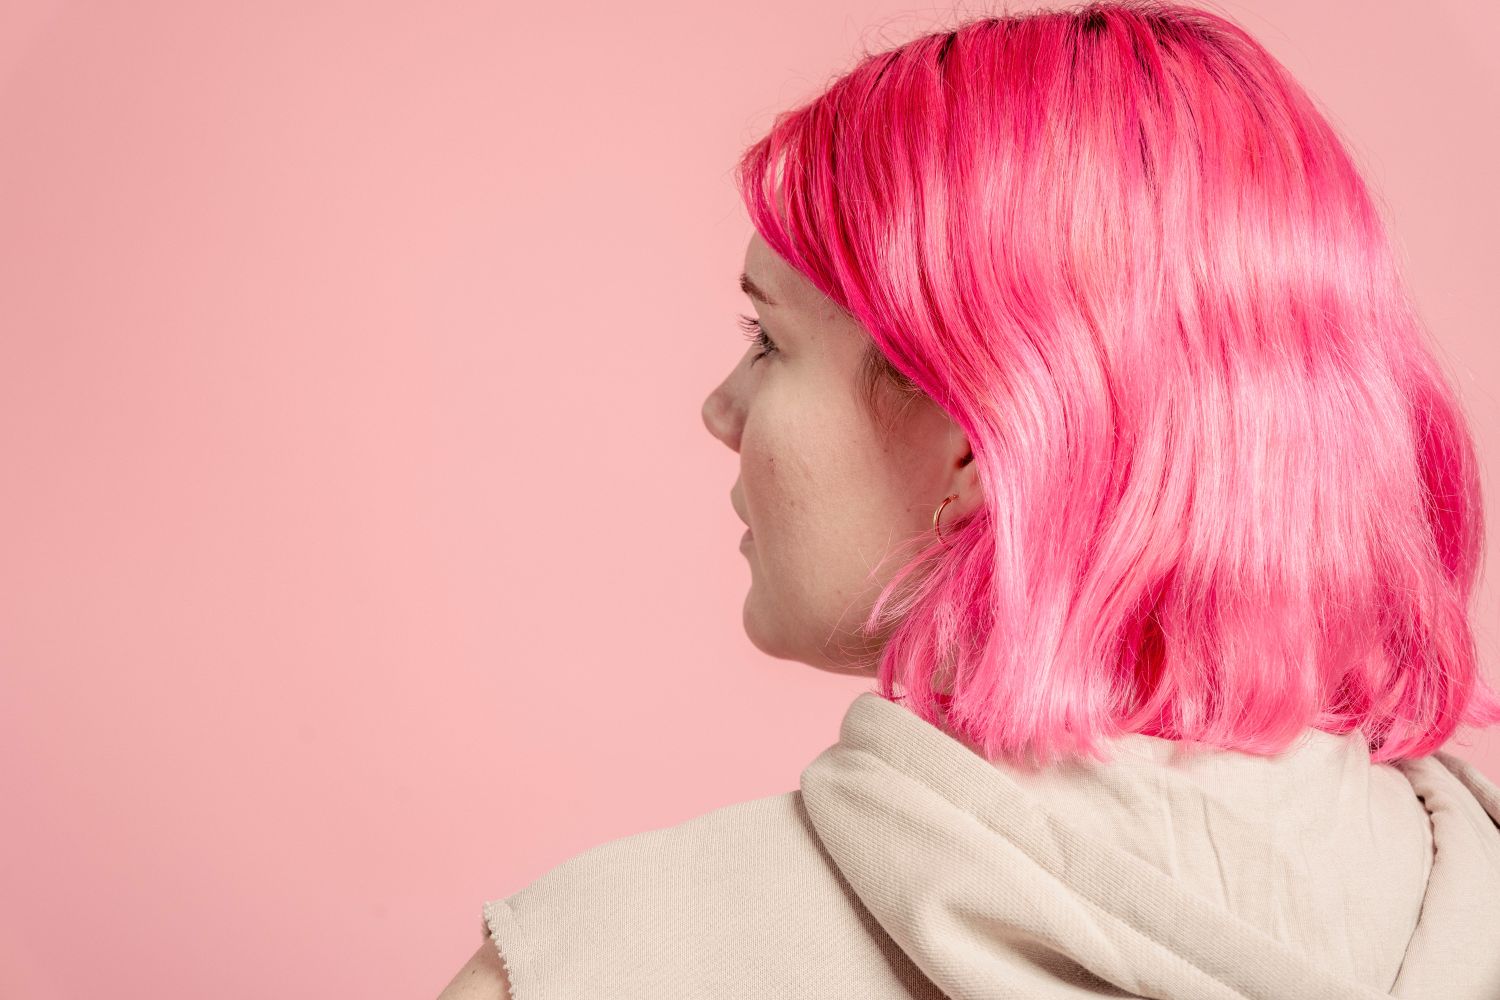 A young woman with pink hair has her back turned to the camera